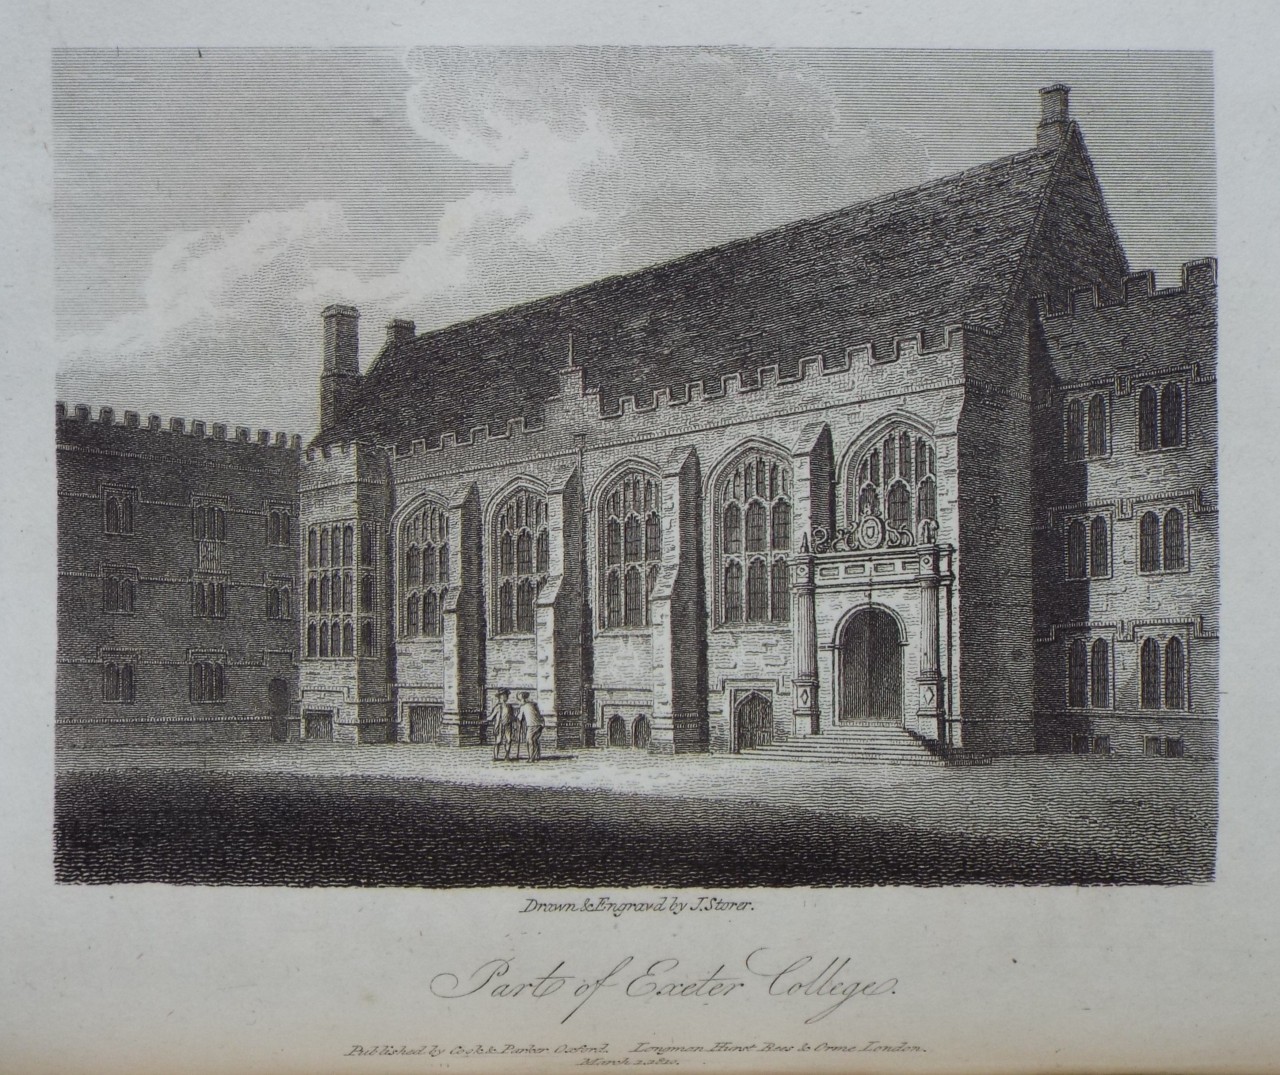 Print - Part of Exeter College. - Storer